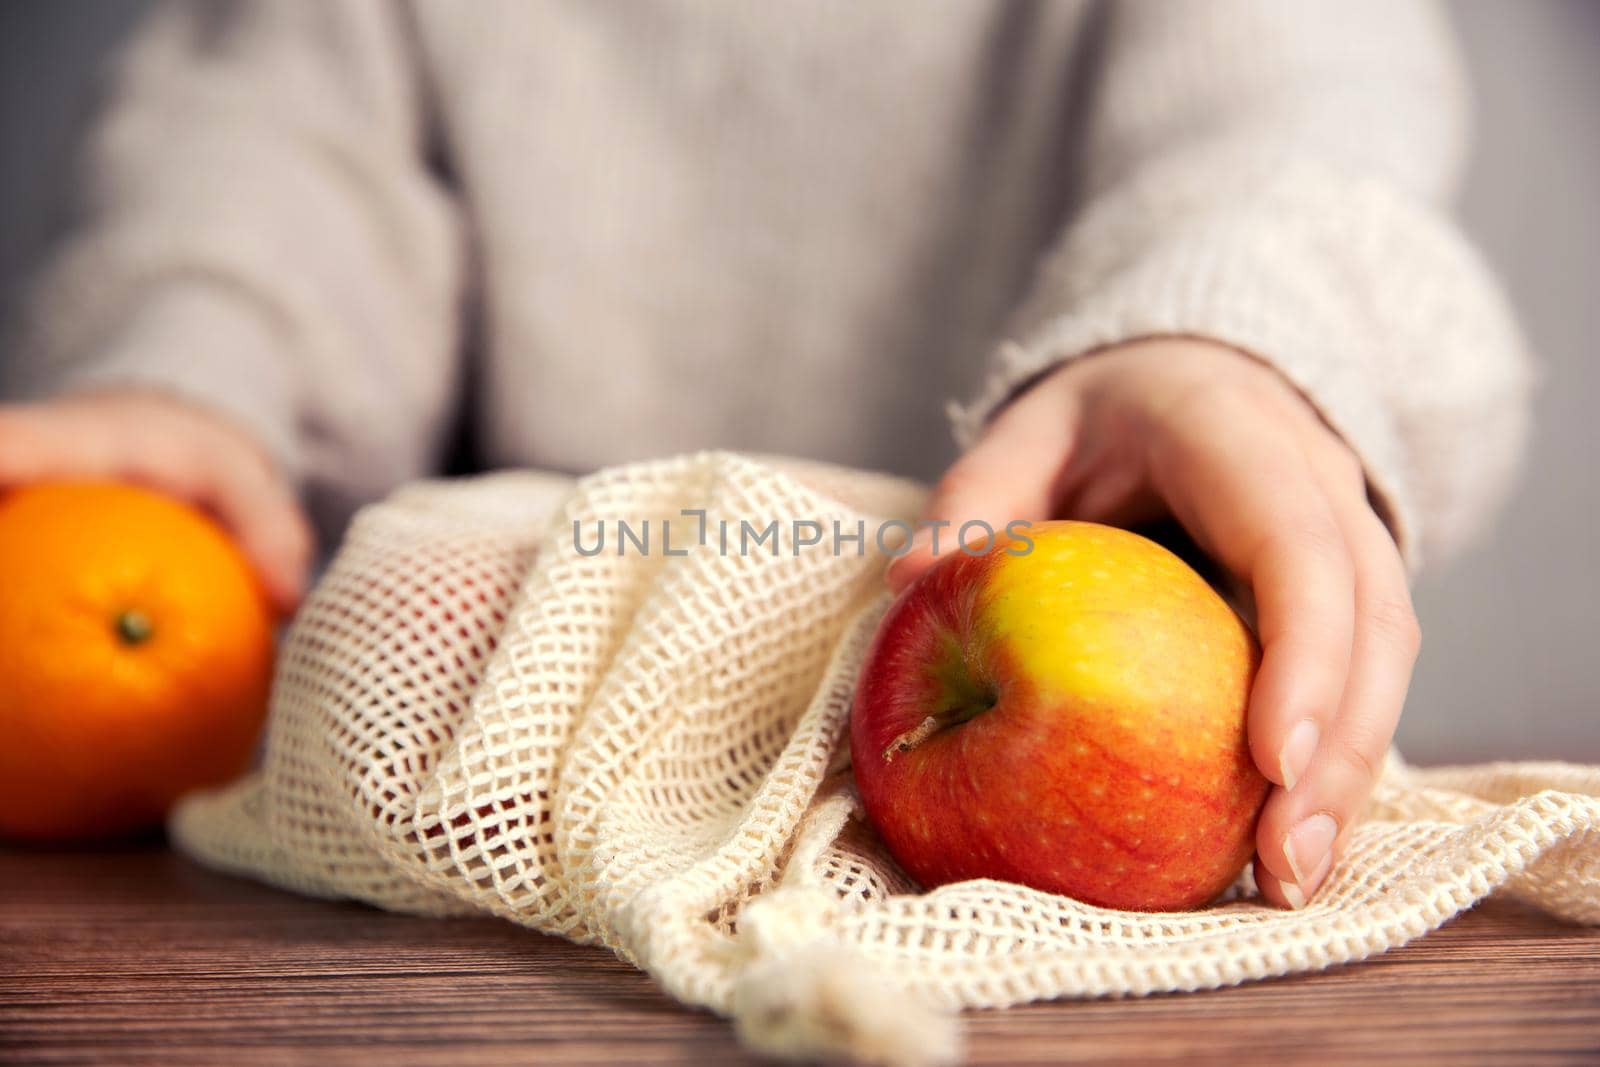 Female hand with environmentally friendly net bag for shopping groceries with Fresh fruit, Apples and oranges, eco friendly net on wooden table by Annebel146